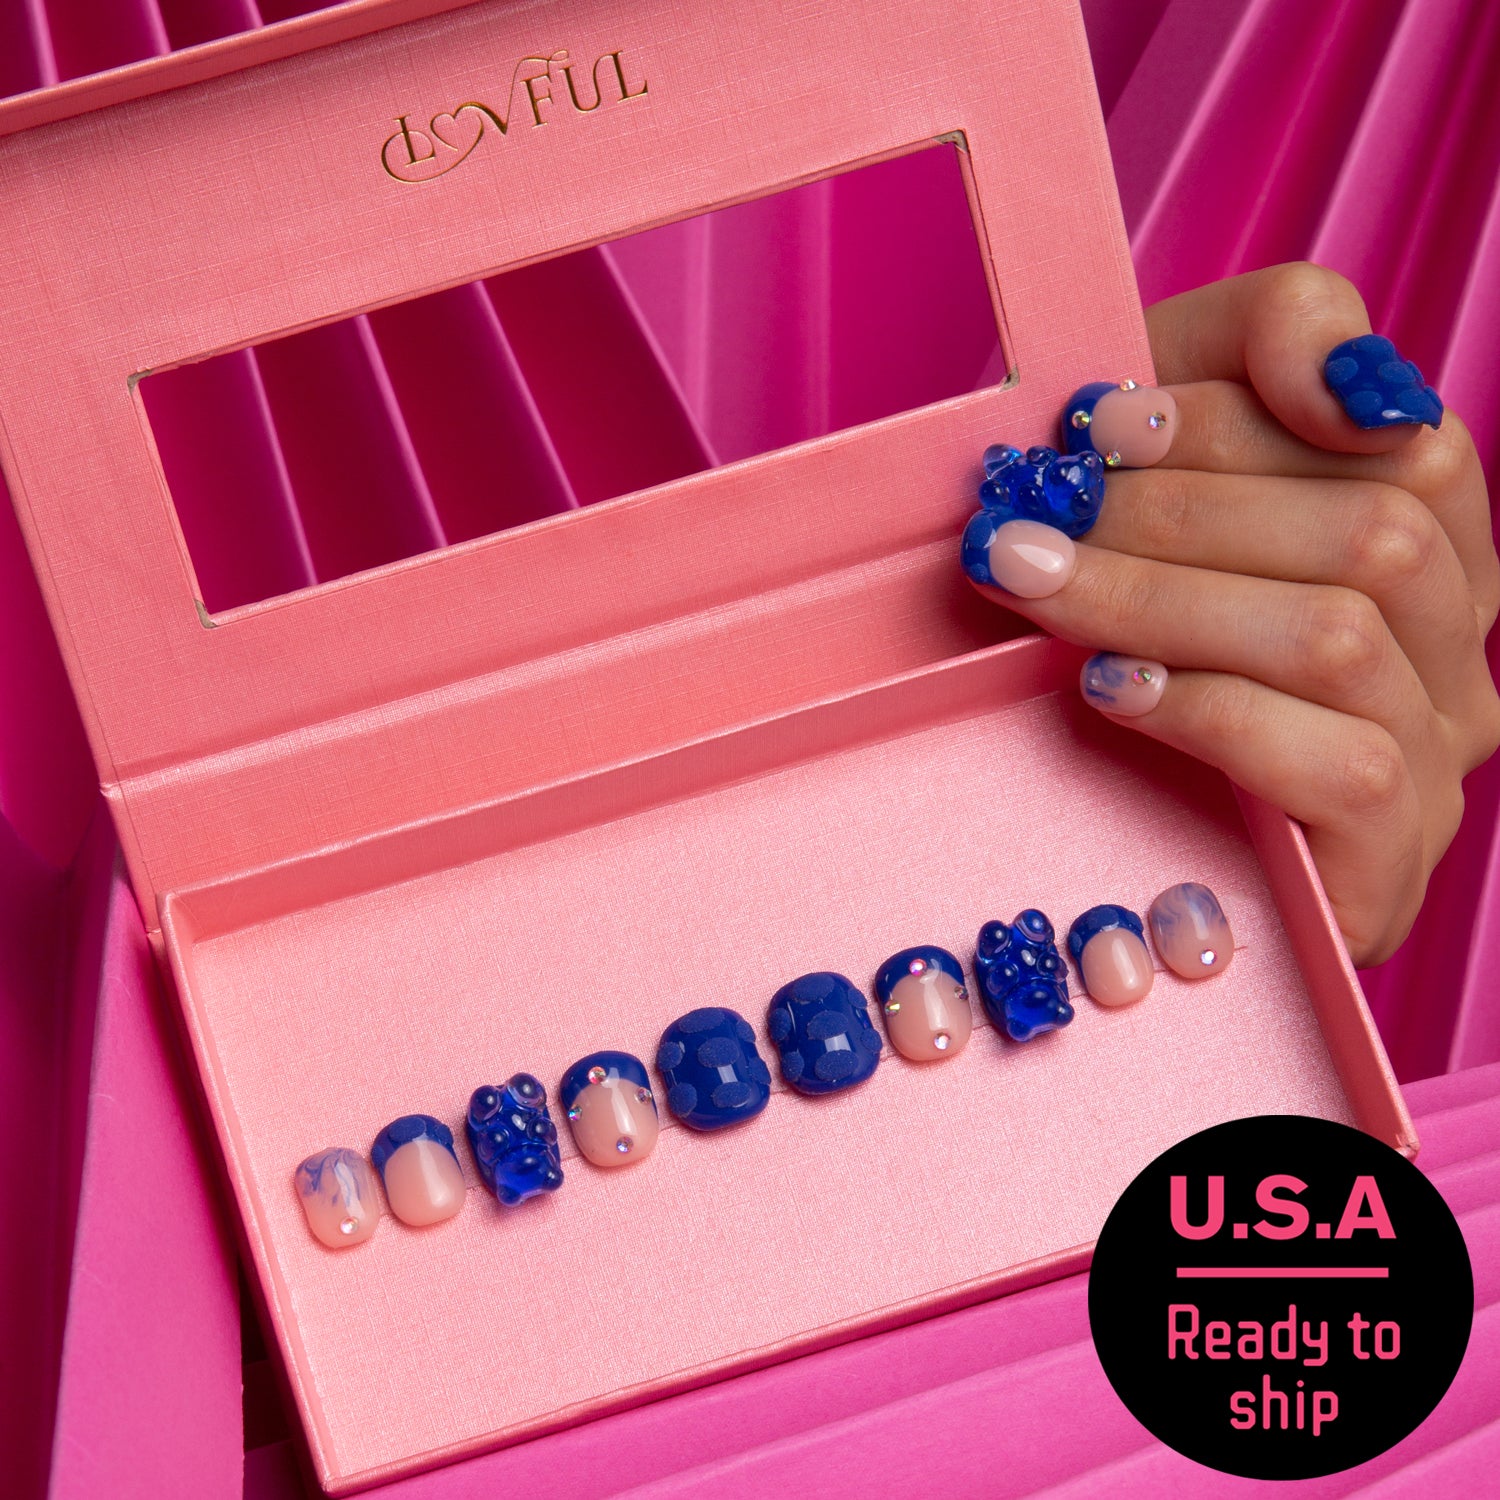 Little Blue Bear Rhinestone French tip press-on nails with blue gummy bears and shiny rhinestones, presented in a pink box. A hand holding the box showcases similar nail design. Includes 'U.S.A Ready to ship'.